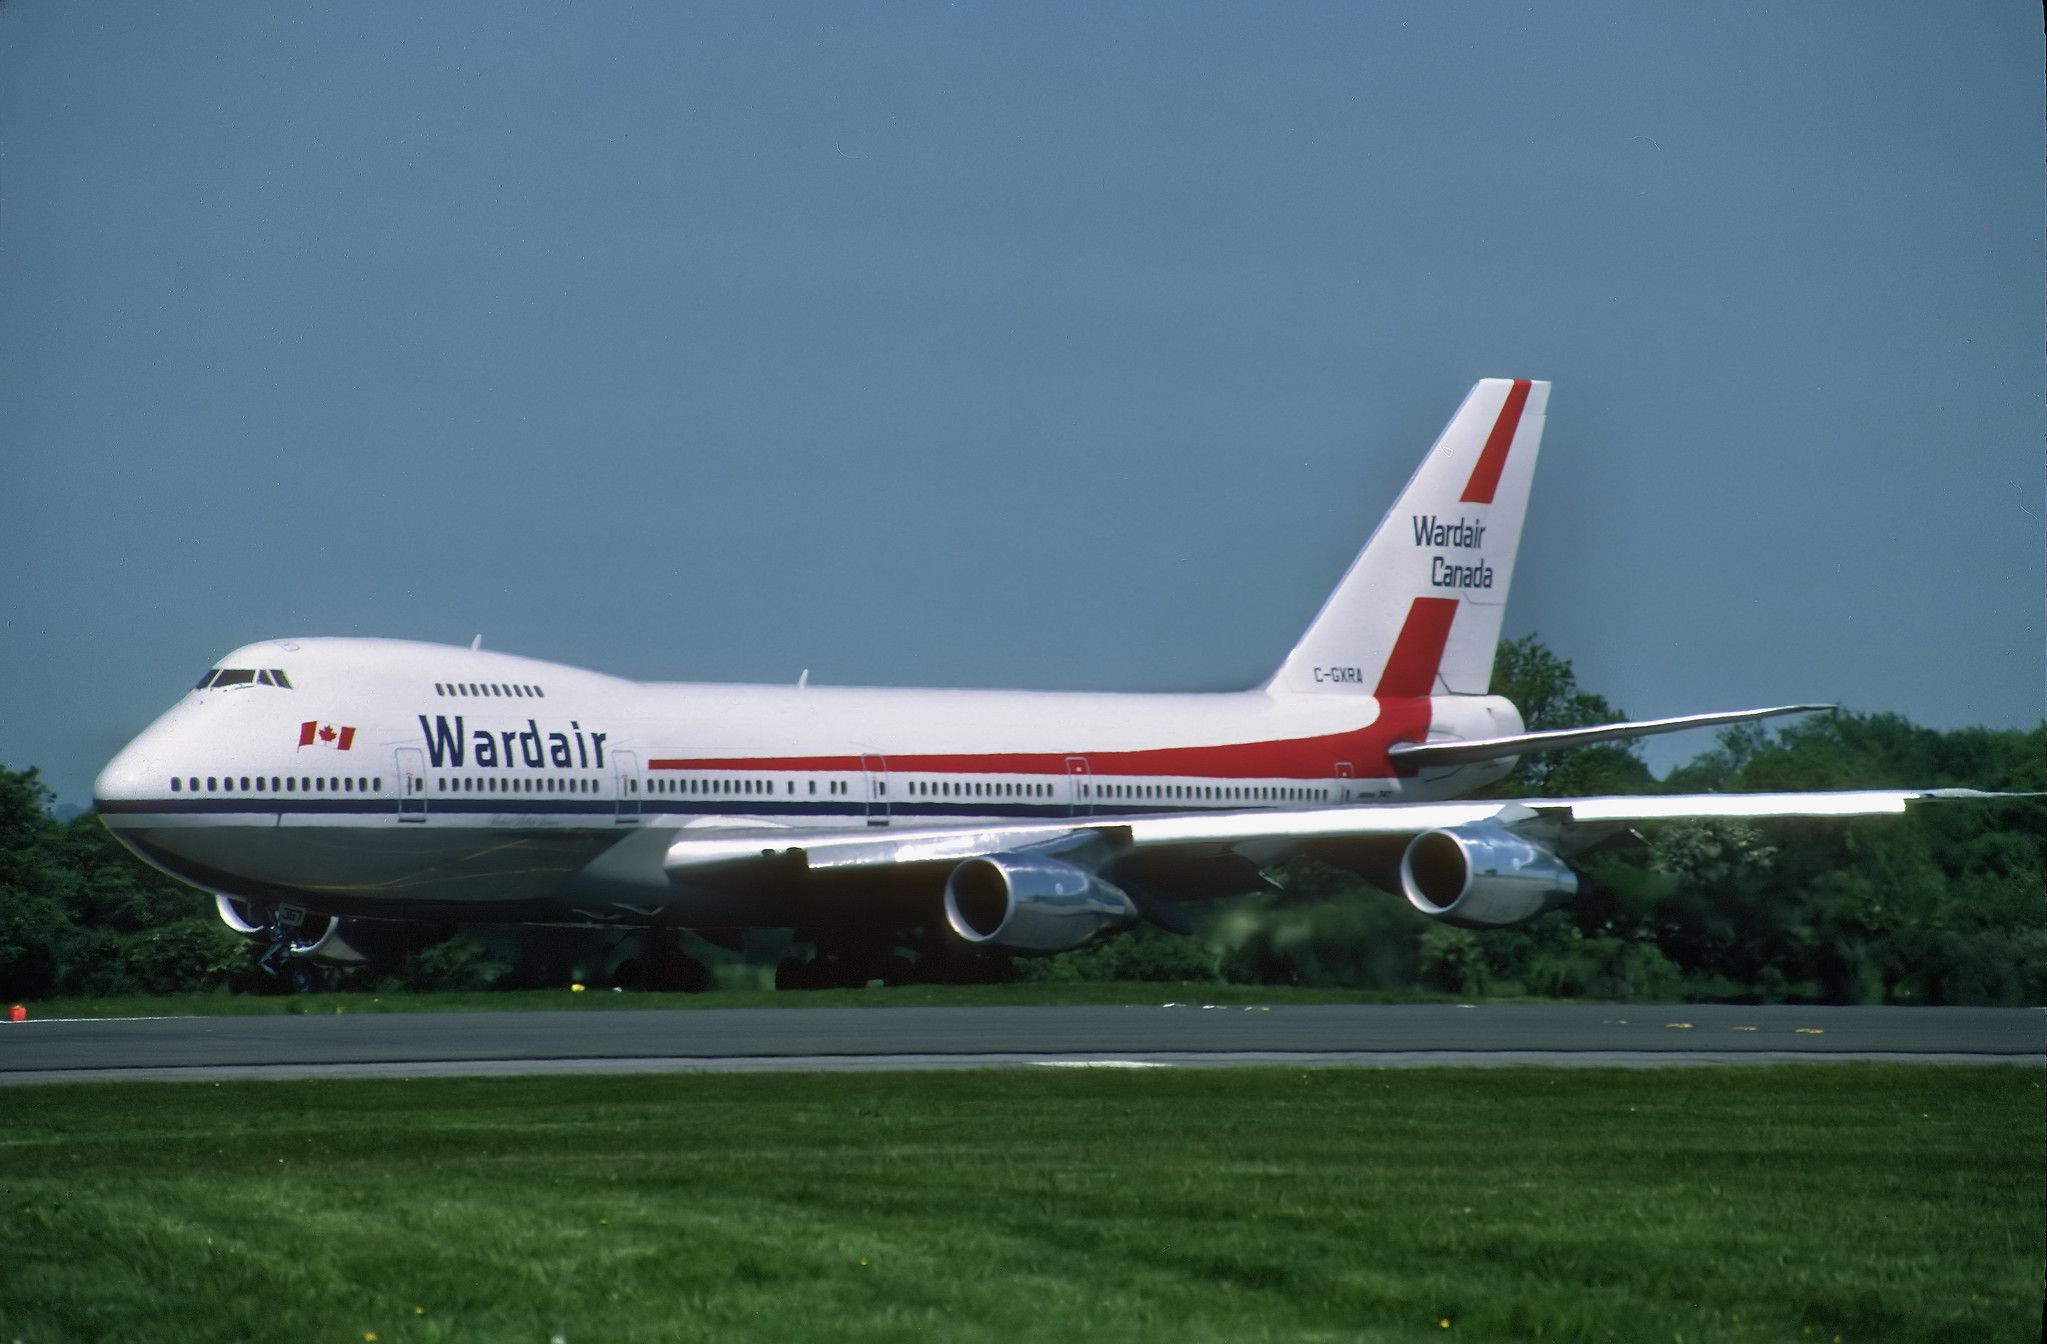 A Wardair Boeing 747-200 on an airport apron.